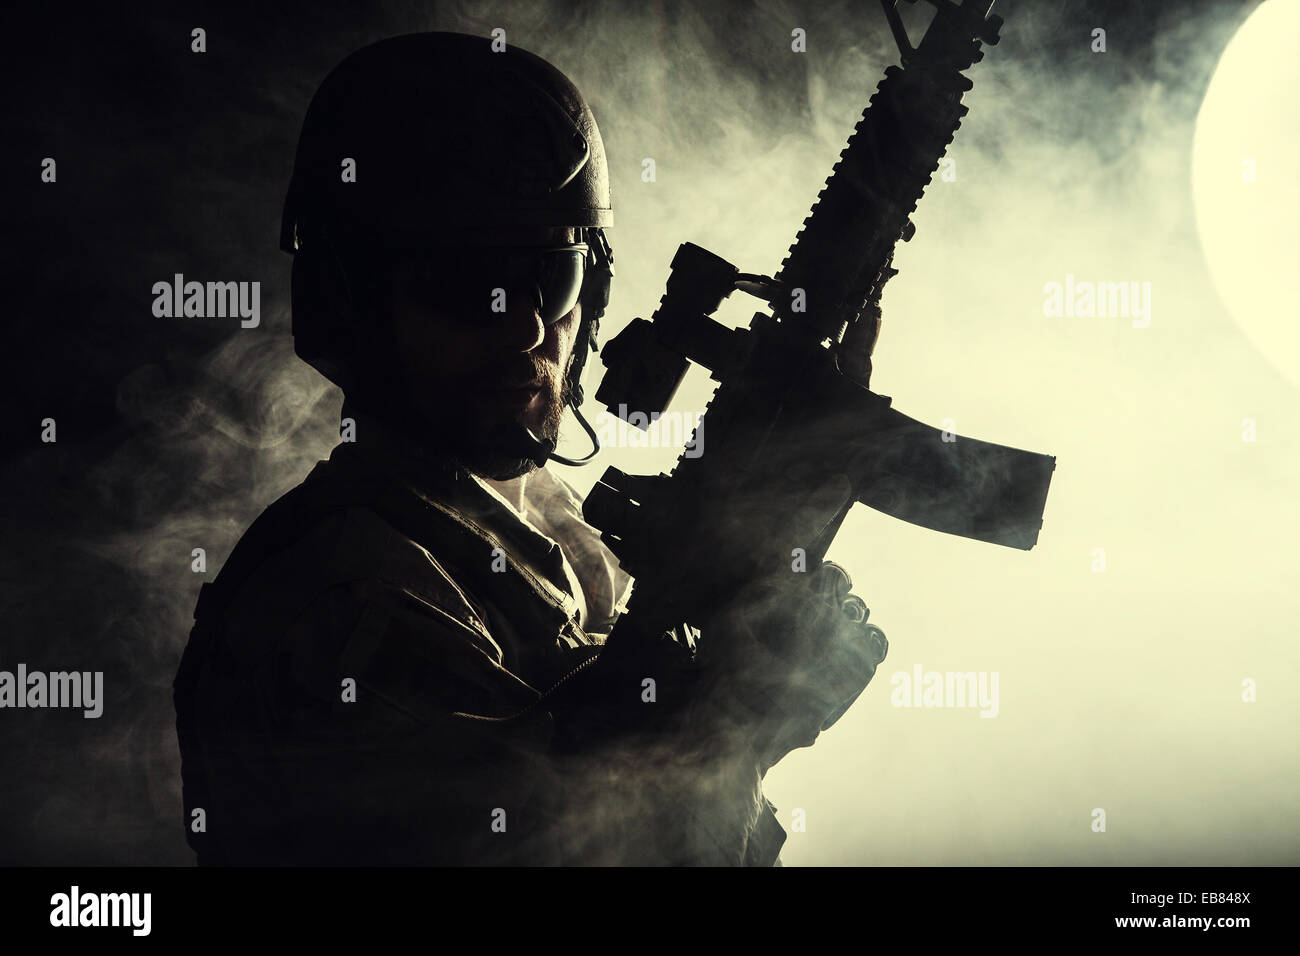 Bearded special forces soldier Stock Photo